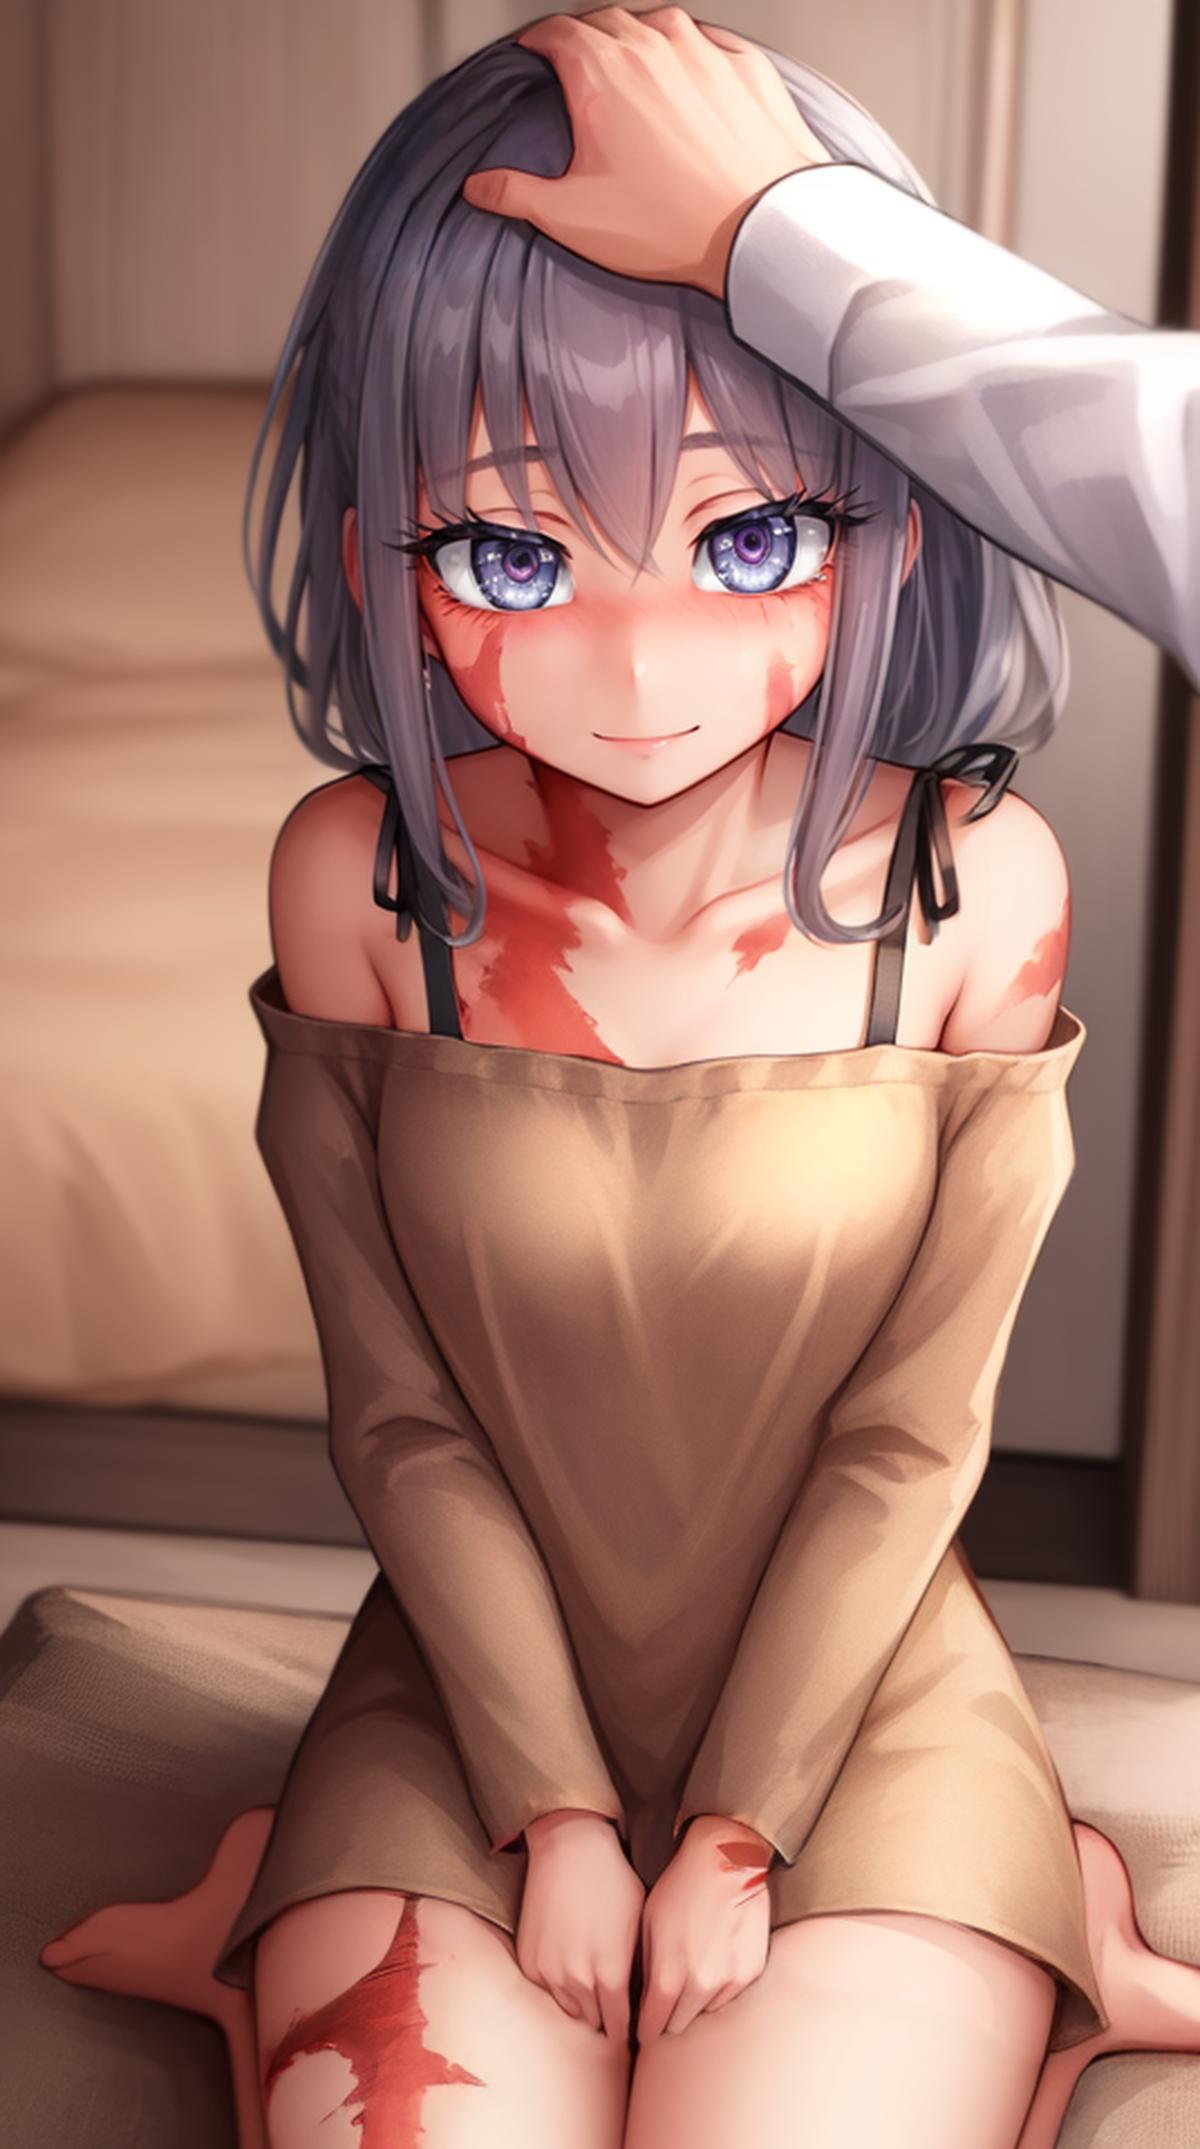 Anime girl with red eyes sitting on a bed.